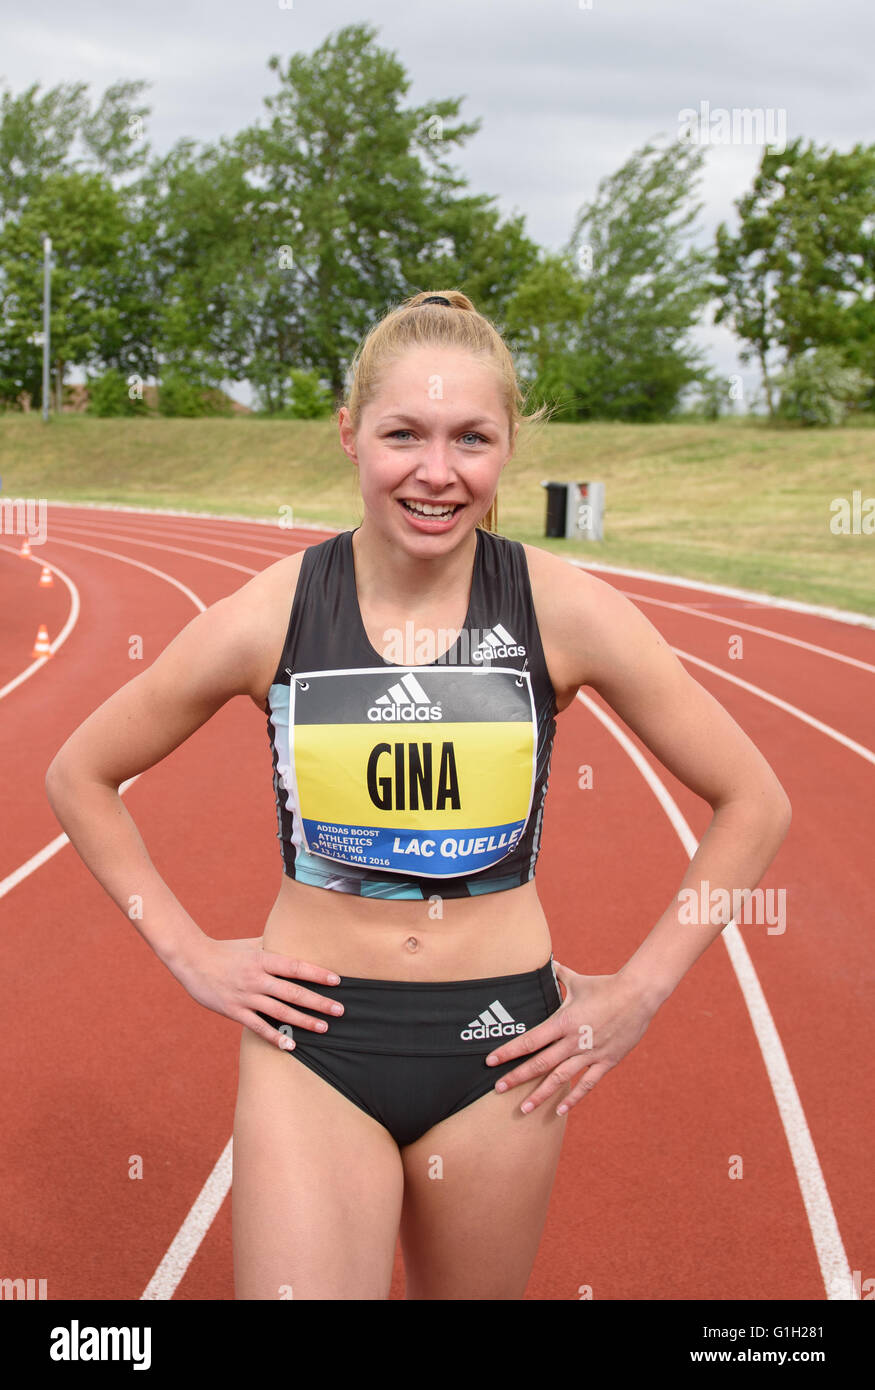 Herzogenaurach, Germany. 14th May, 2016. Gina Lueckenkemper of LG Olympia  Dortmund celebrates after winning in the women's 100 metre race during the Adidas  Boost Athletics Meeting in Herzogenaurach, Germany, 14 May 2016.